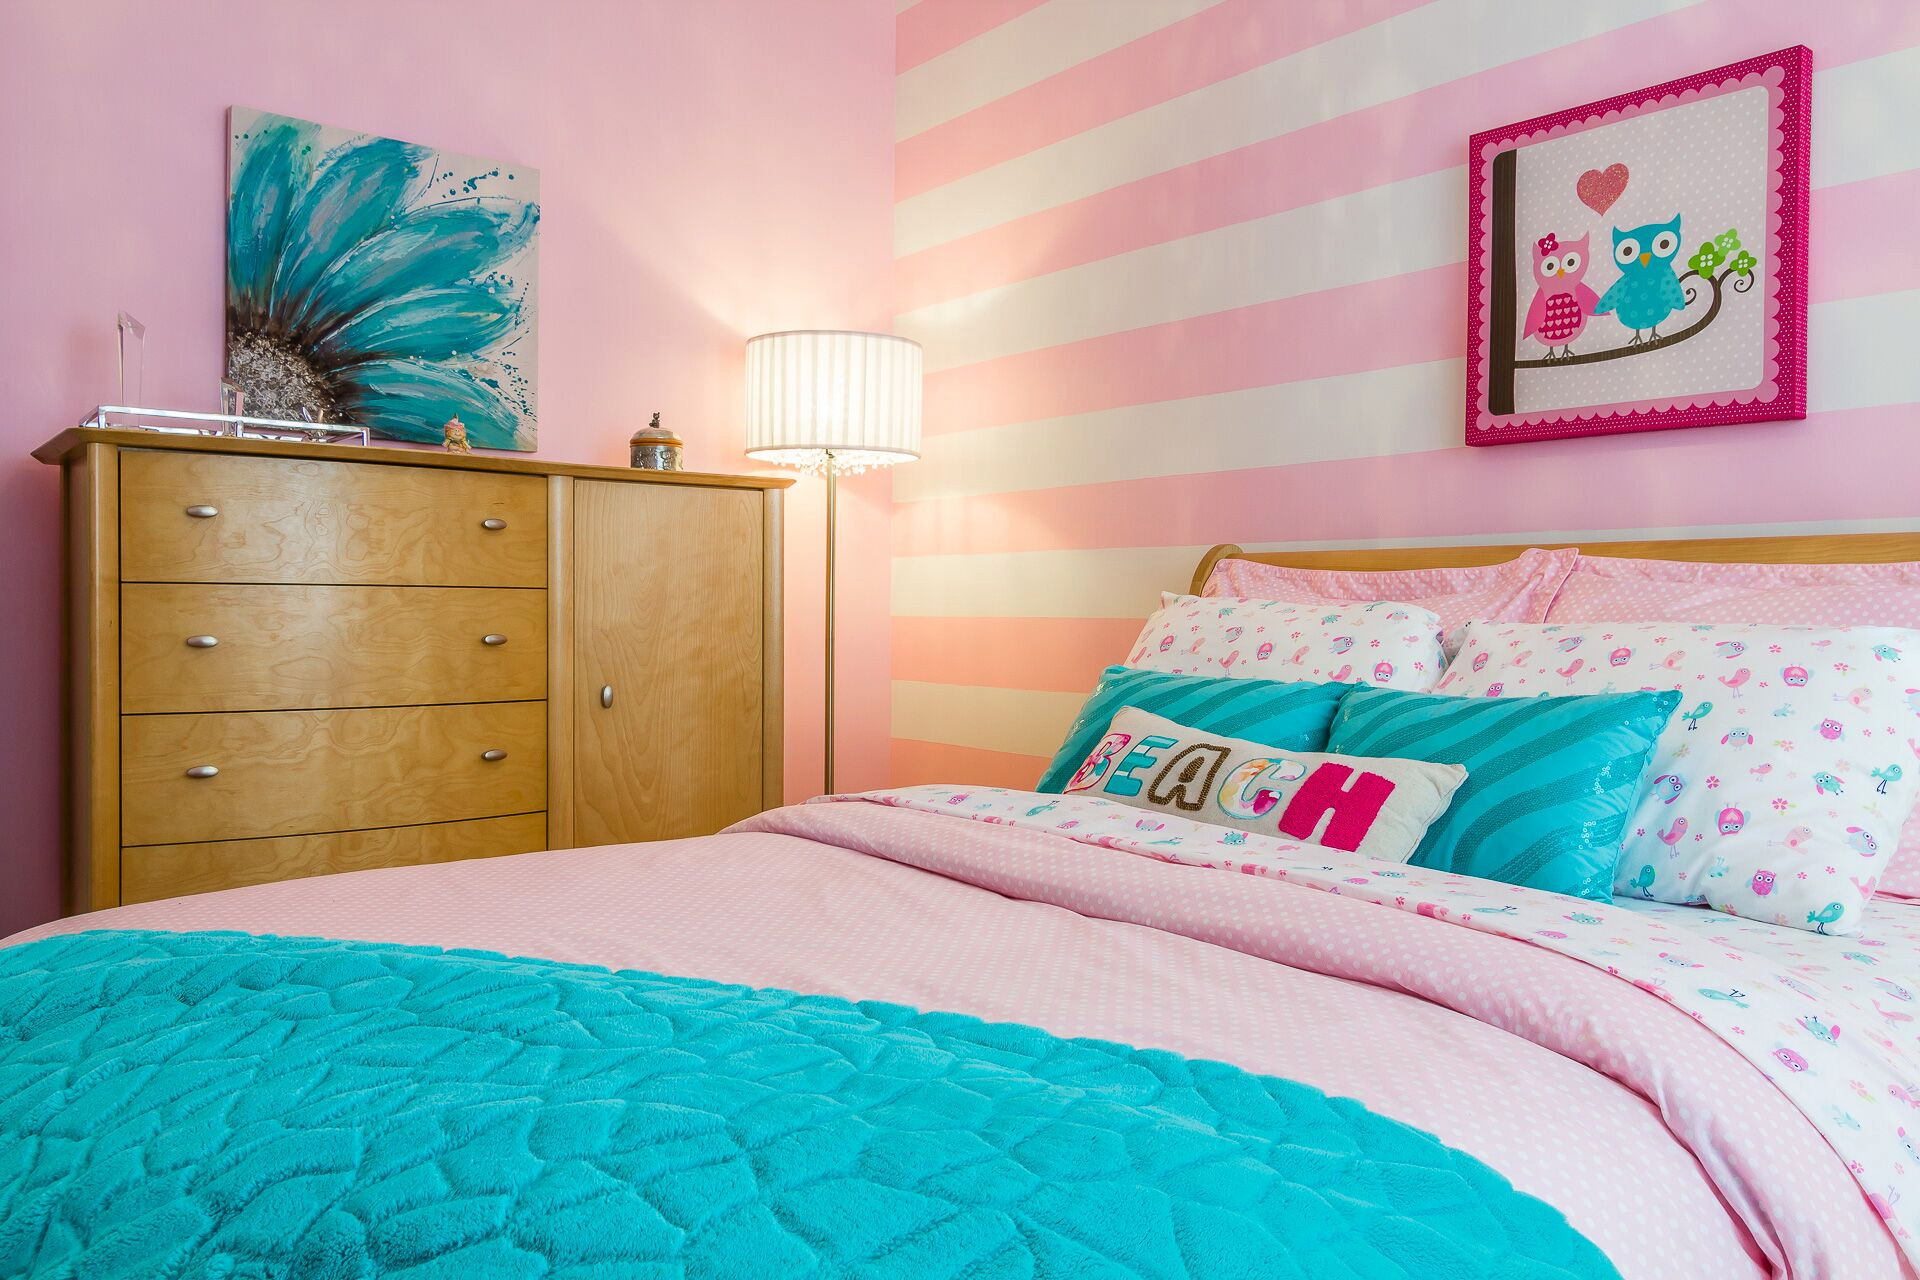 75 Beautiful Turquoise Bedroom With Pink Walls Pictures Ideas July 2021 Houzz